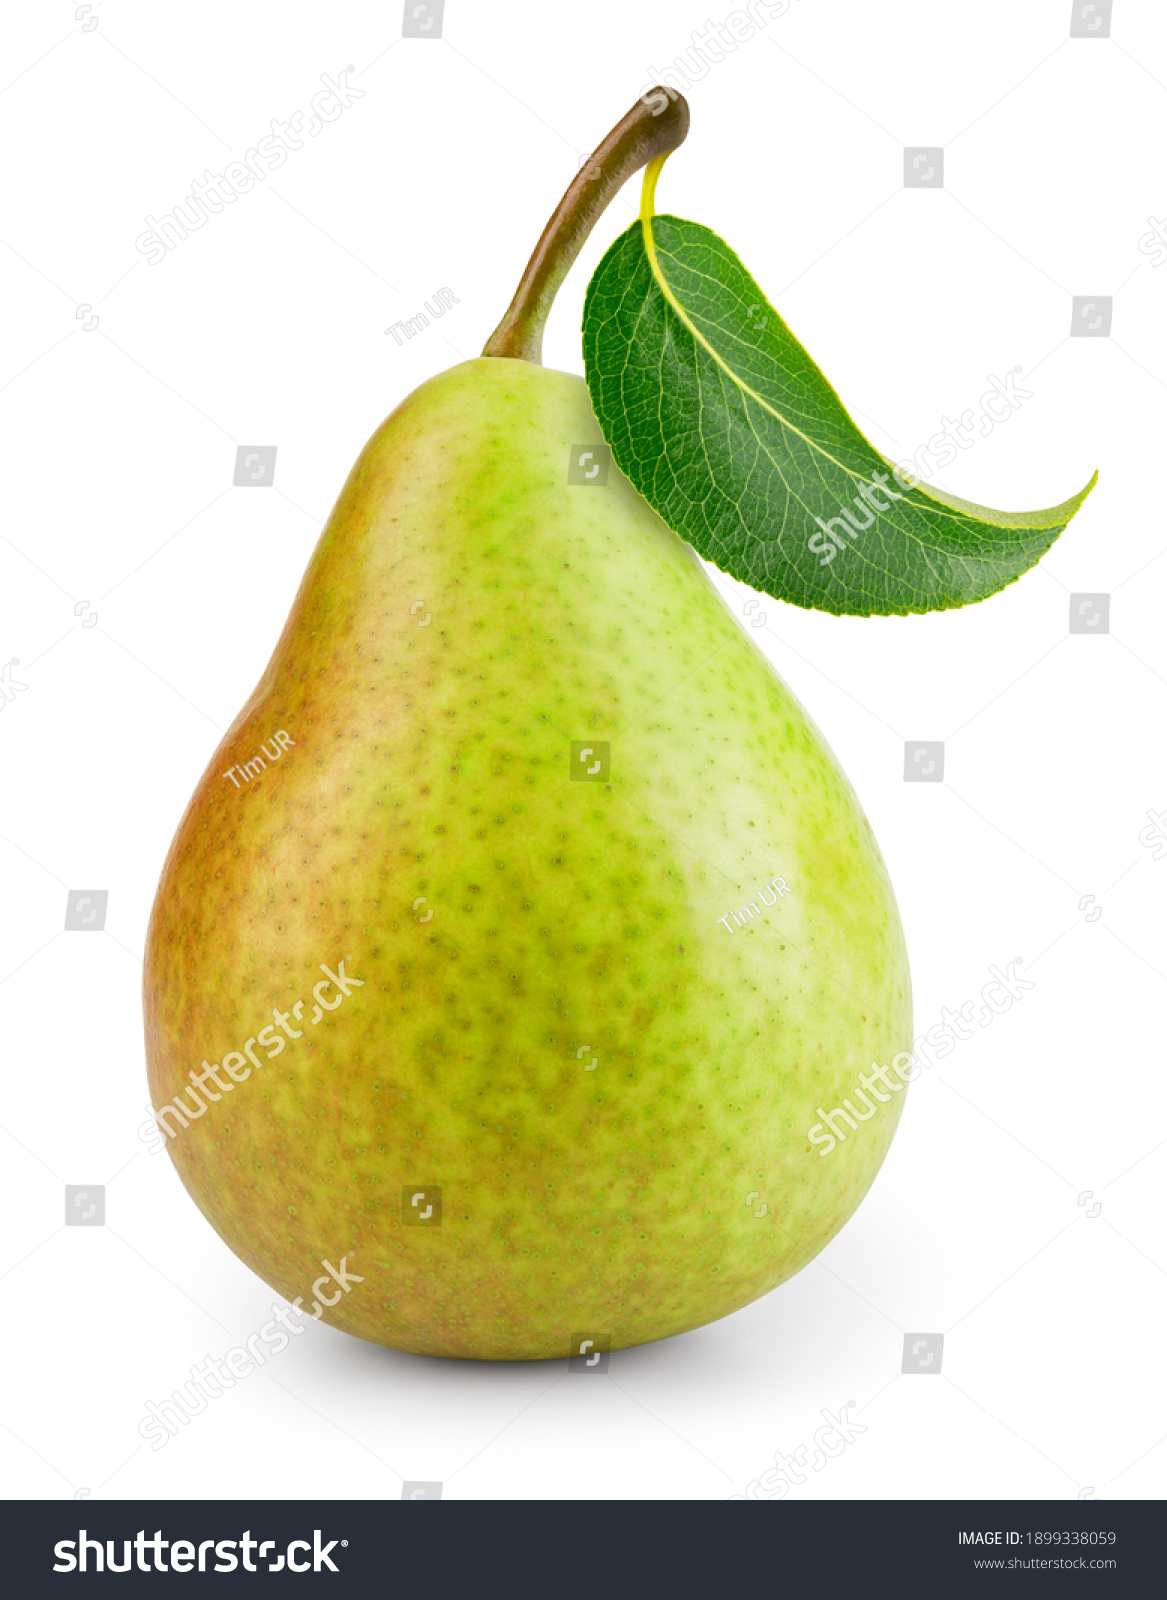 Pear isolated. One green pear fruit with leaf on white background. Green pear. With clipping path. Full depth of field.  #1899338059